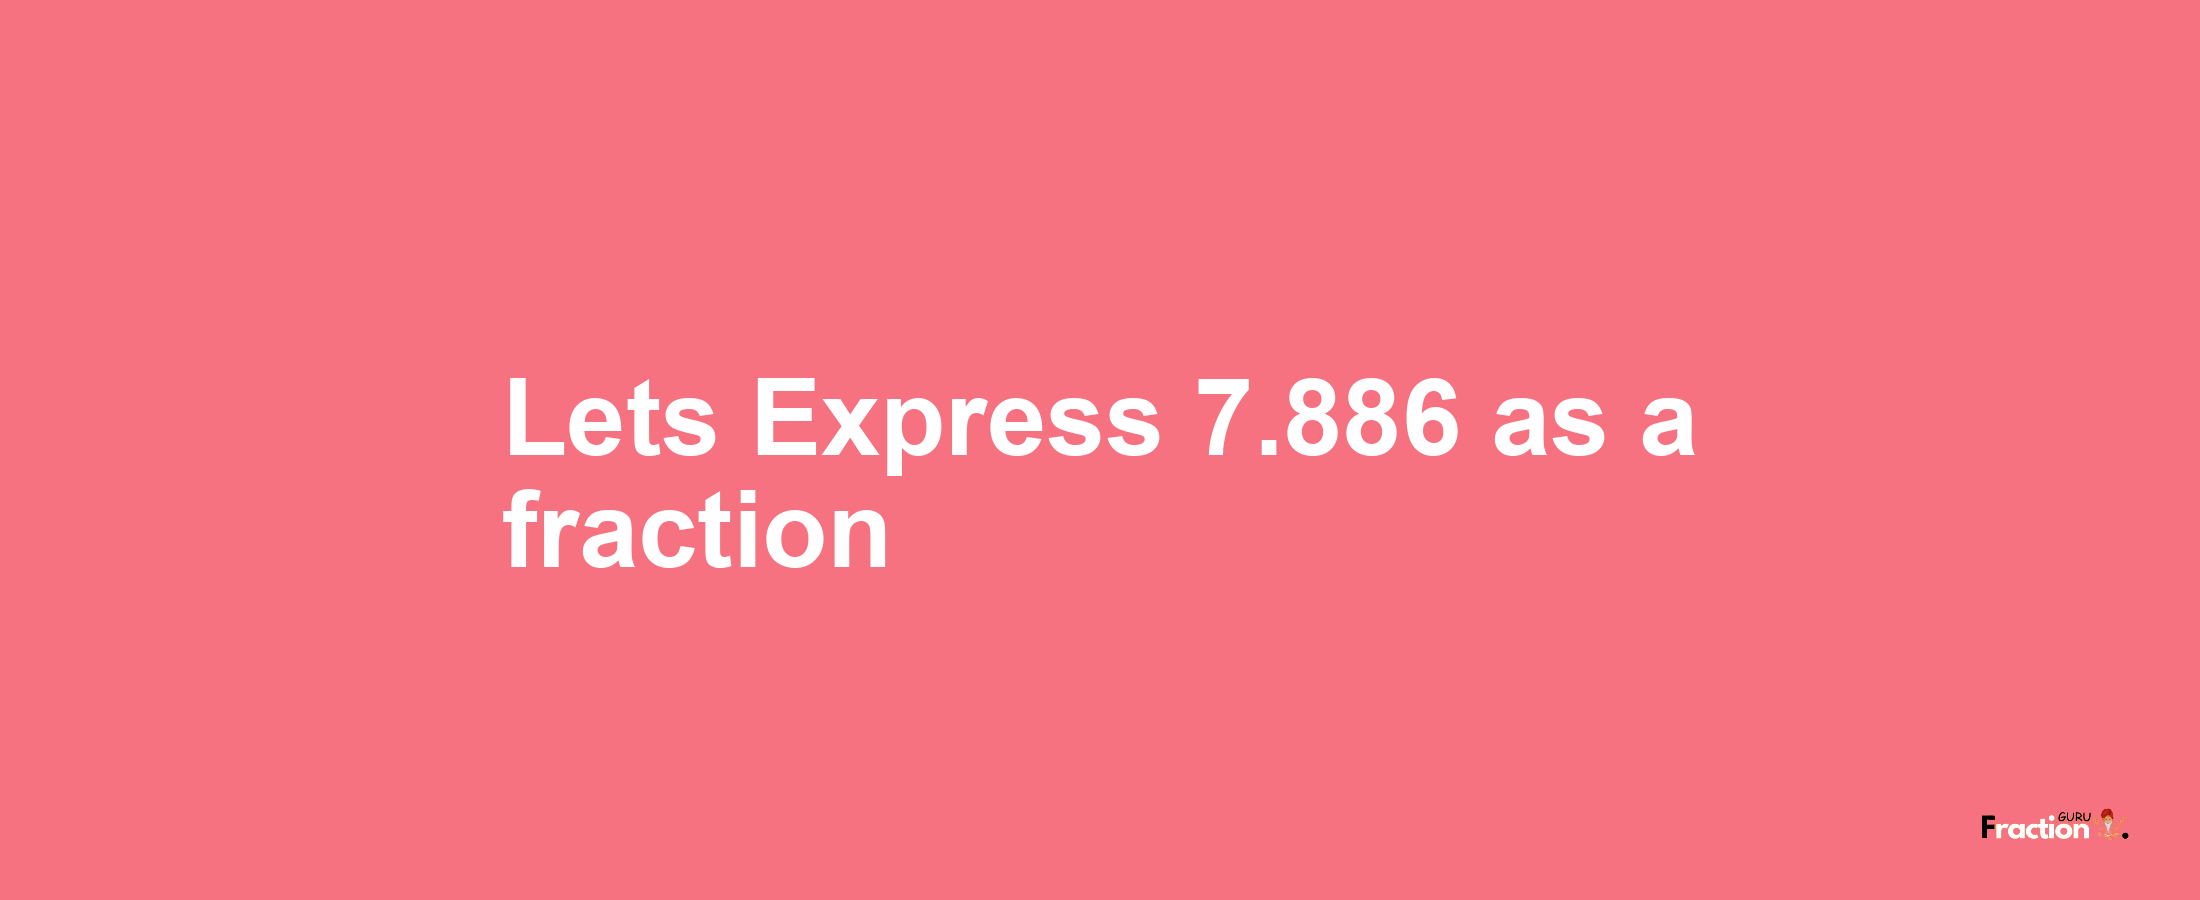 Lets Express 7.886 as afraction